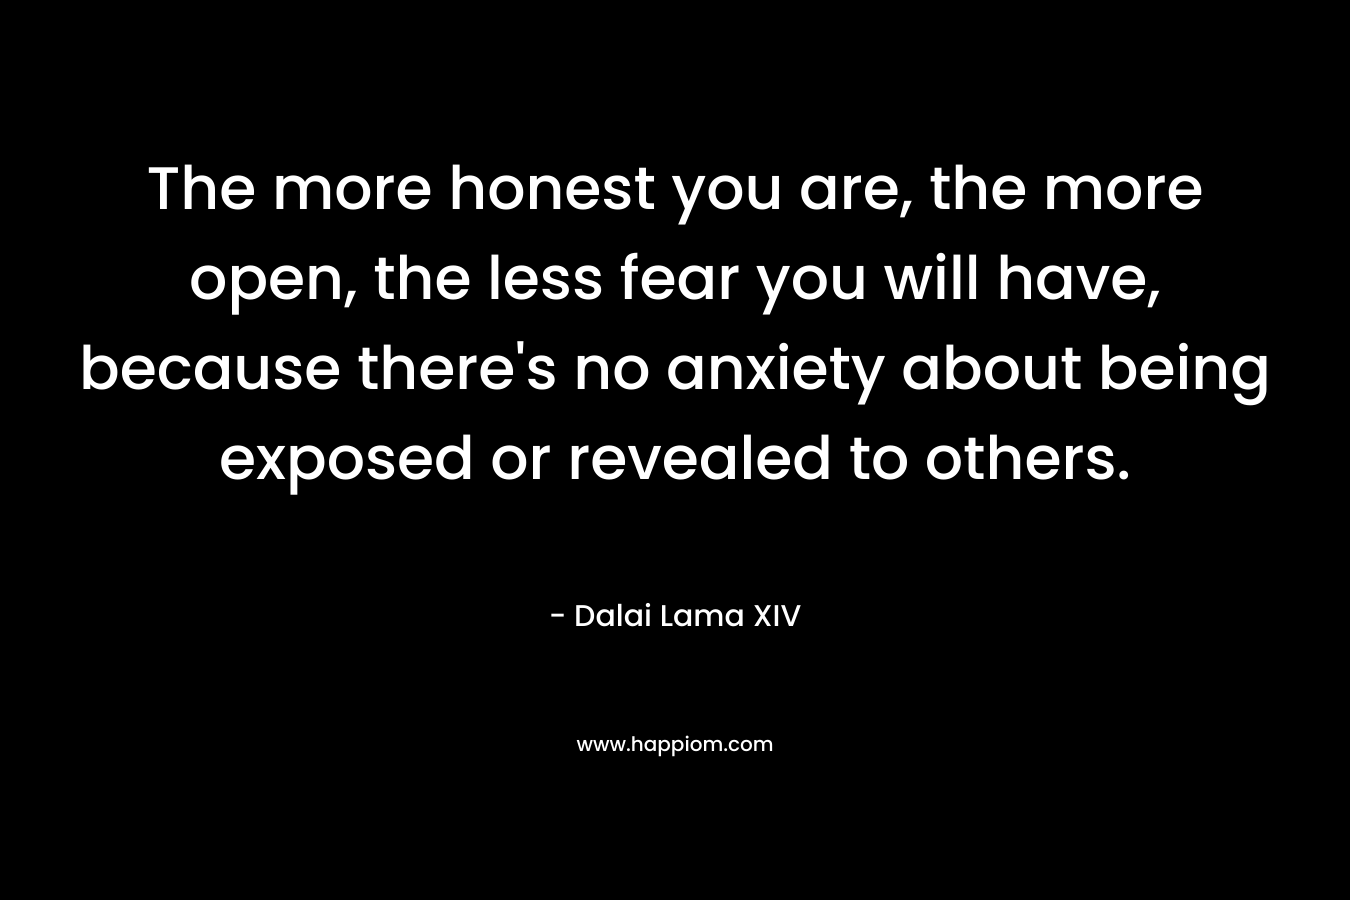 The more honest you are, the more open, the less fear you will have, because there’s no anxiety about being exposed or revealed to others. – Dalai Lama XIV